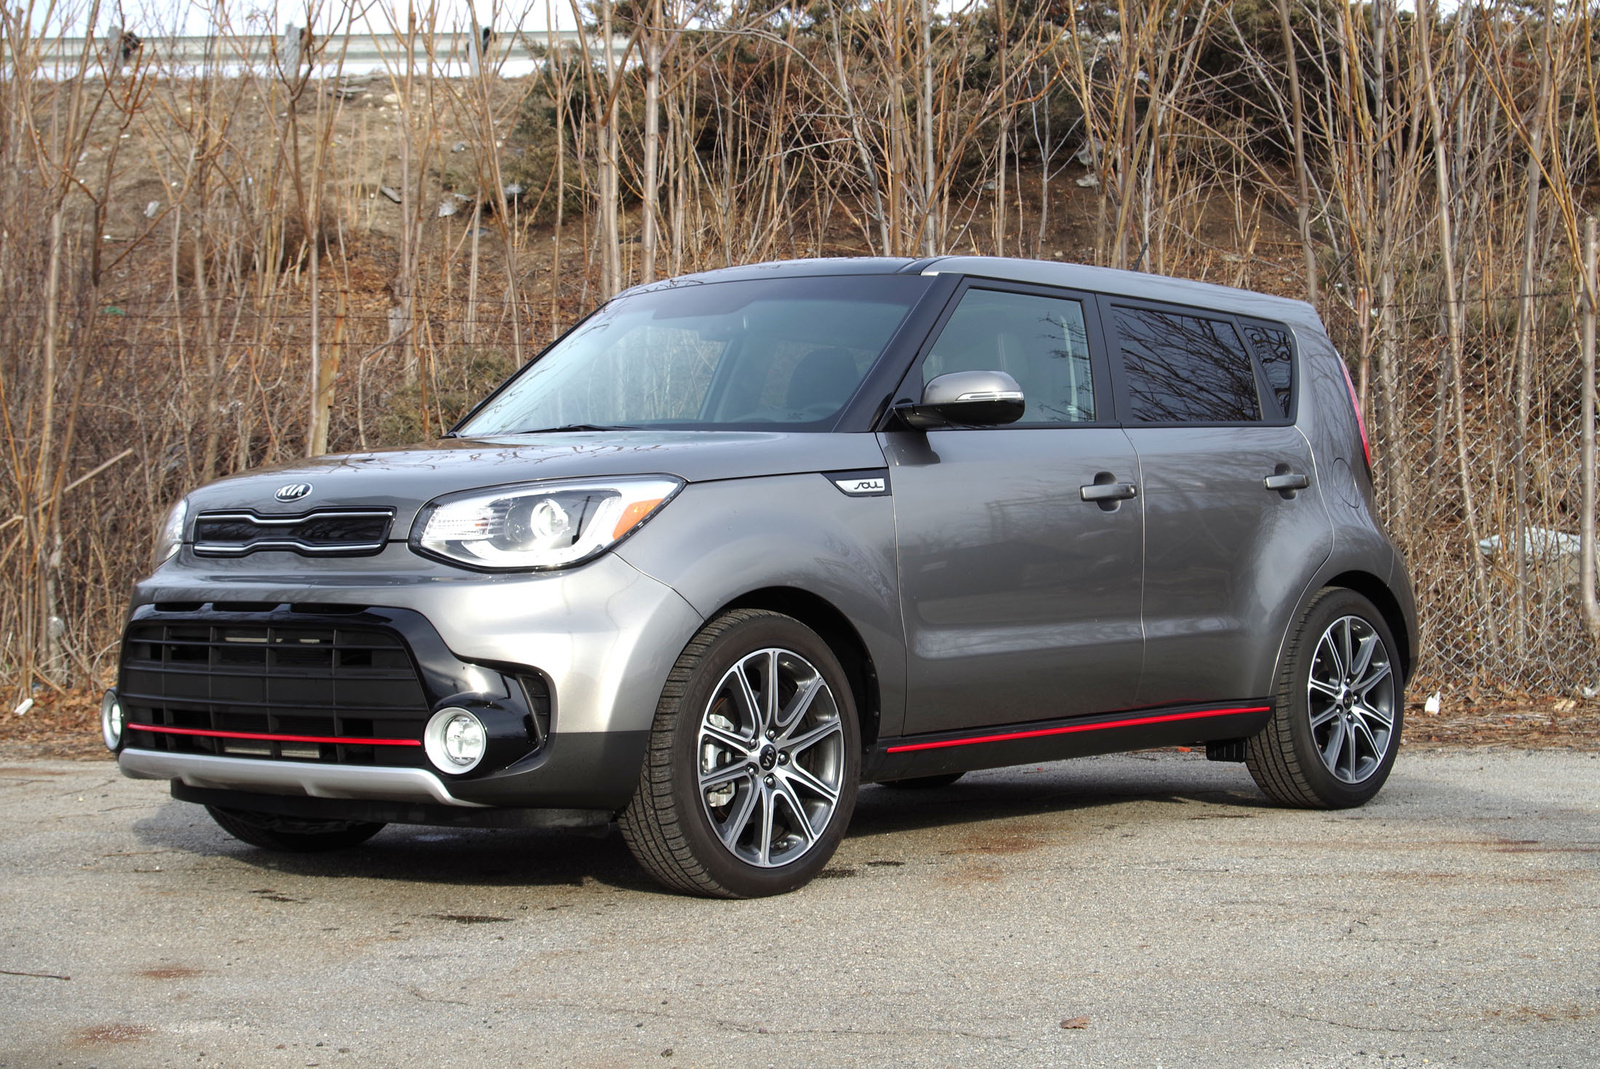 2017 Kia Soul Test Drive Review summaryImage